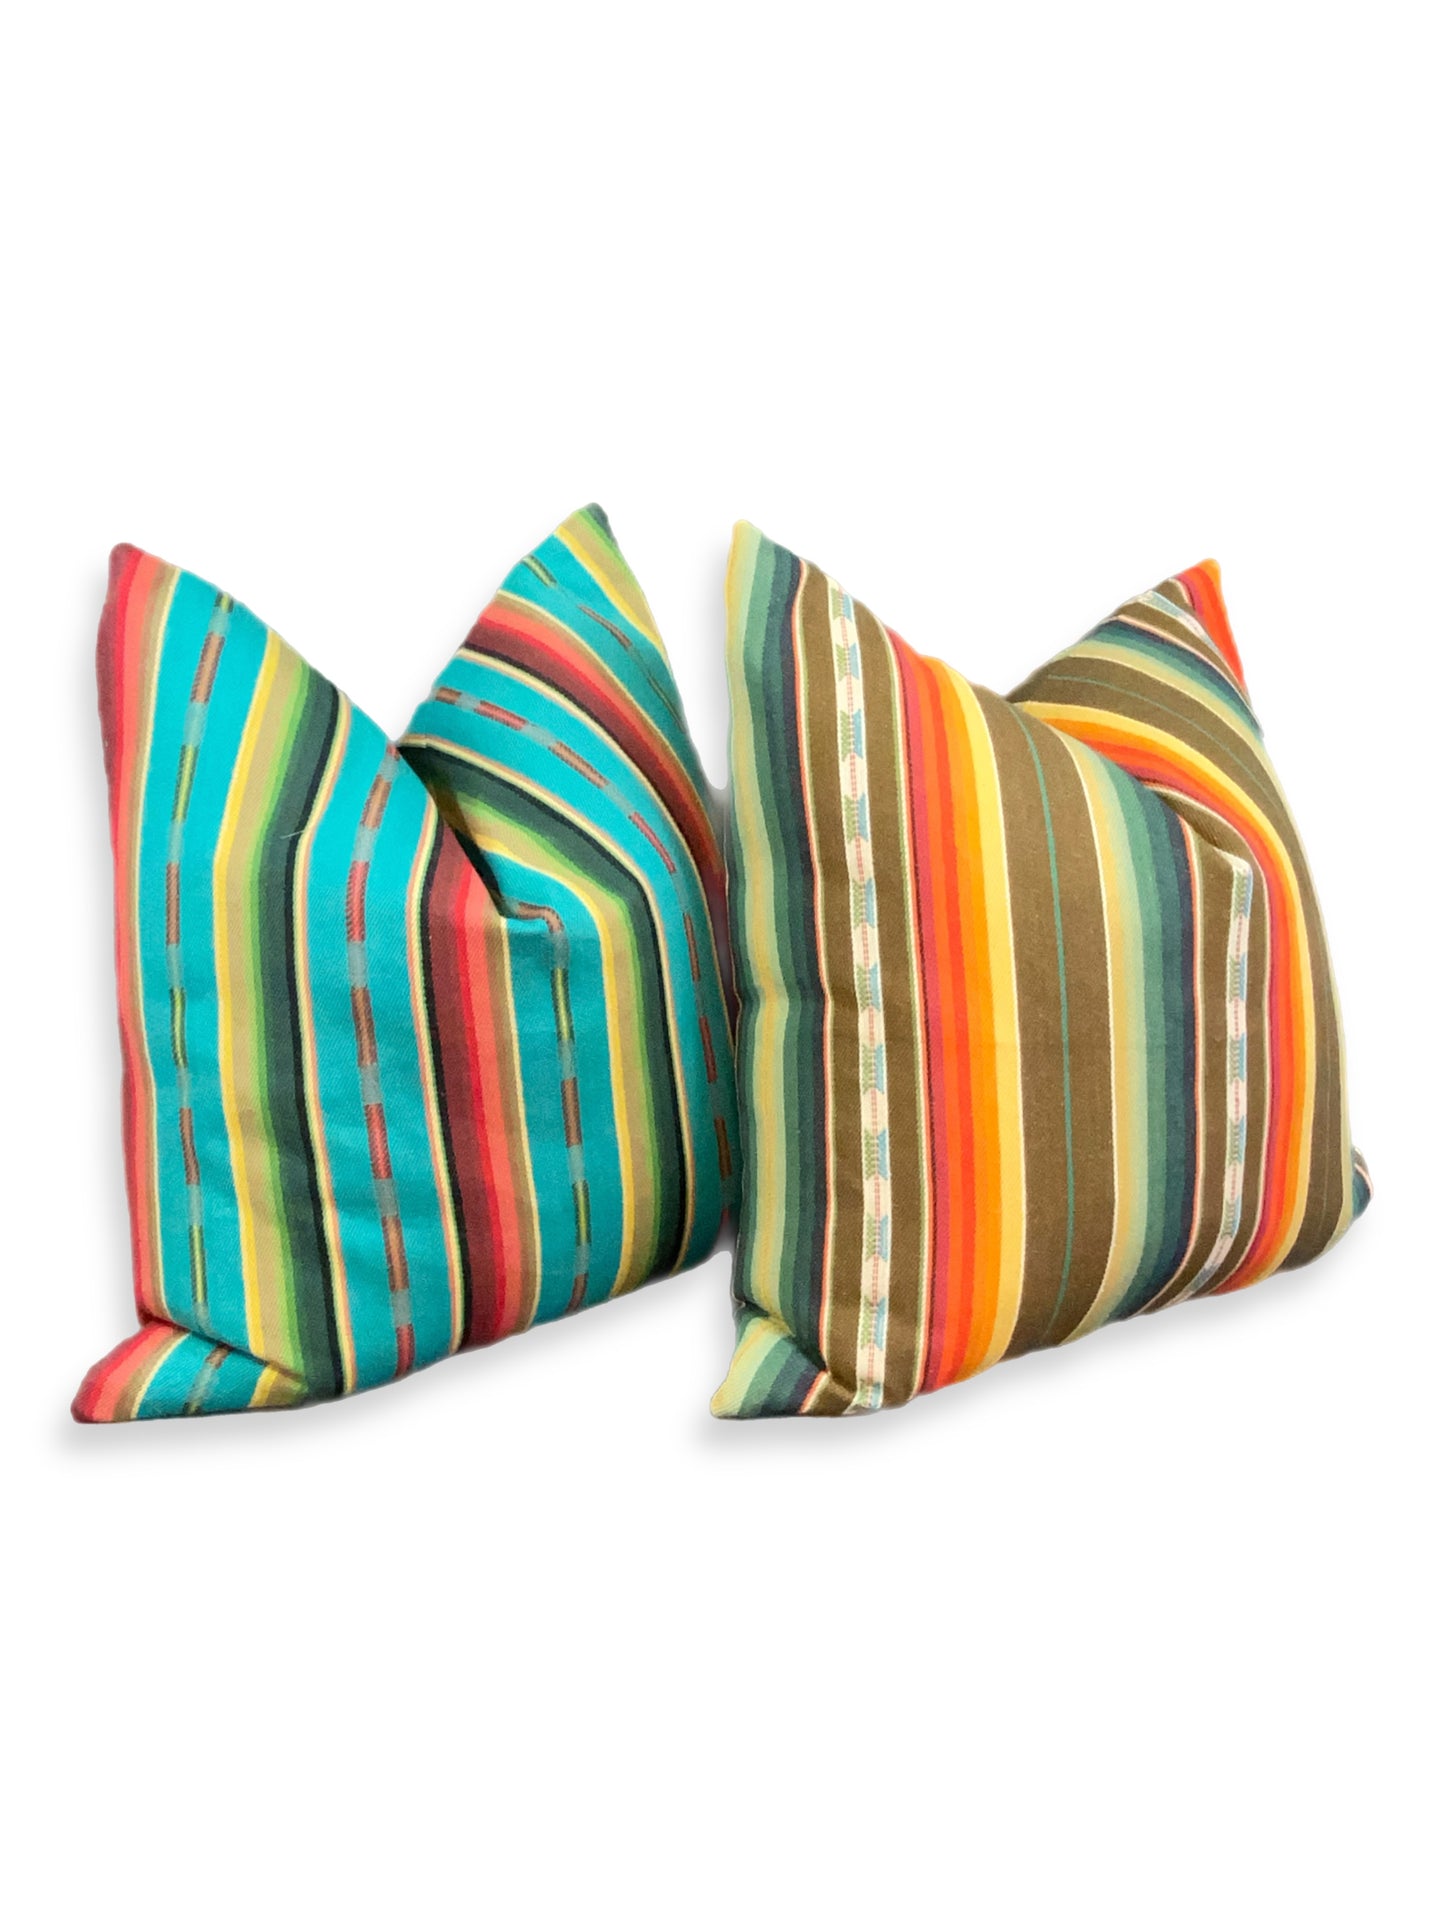 Luxury Pillow -  24" x 24" - Native-Turquoise ; beautiful woven stripes of turquoise, black, oranges, yellows, greens, blues, and reds